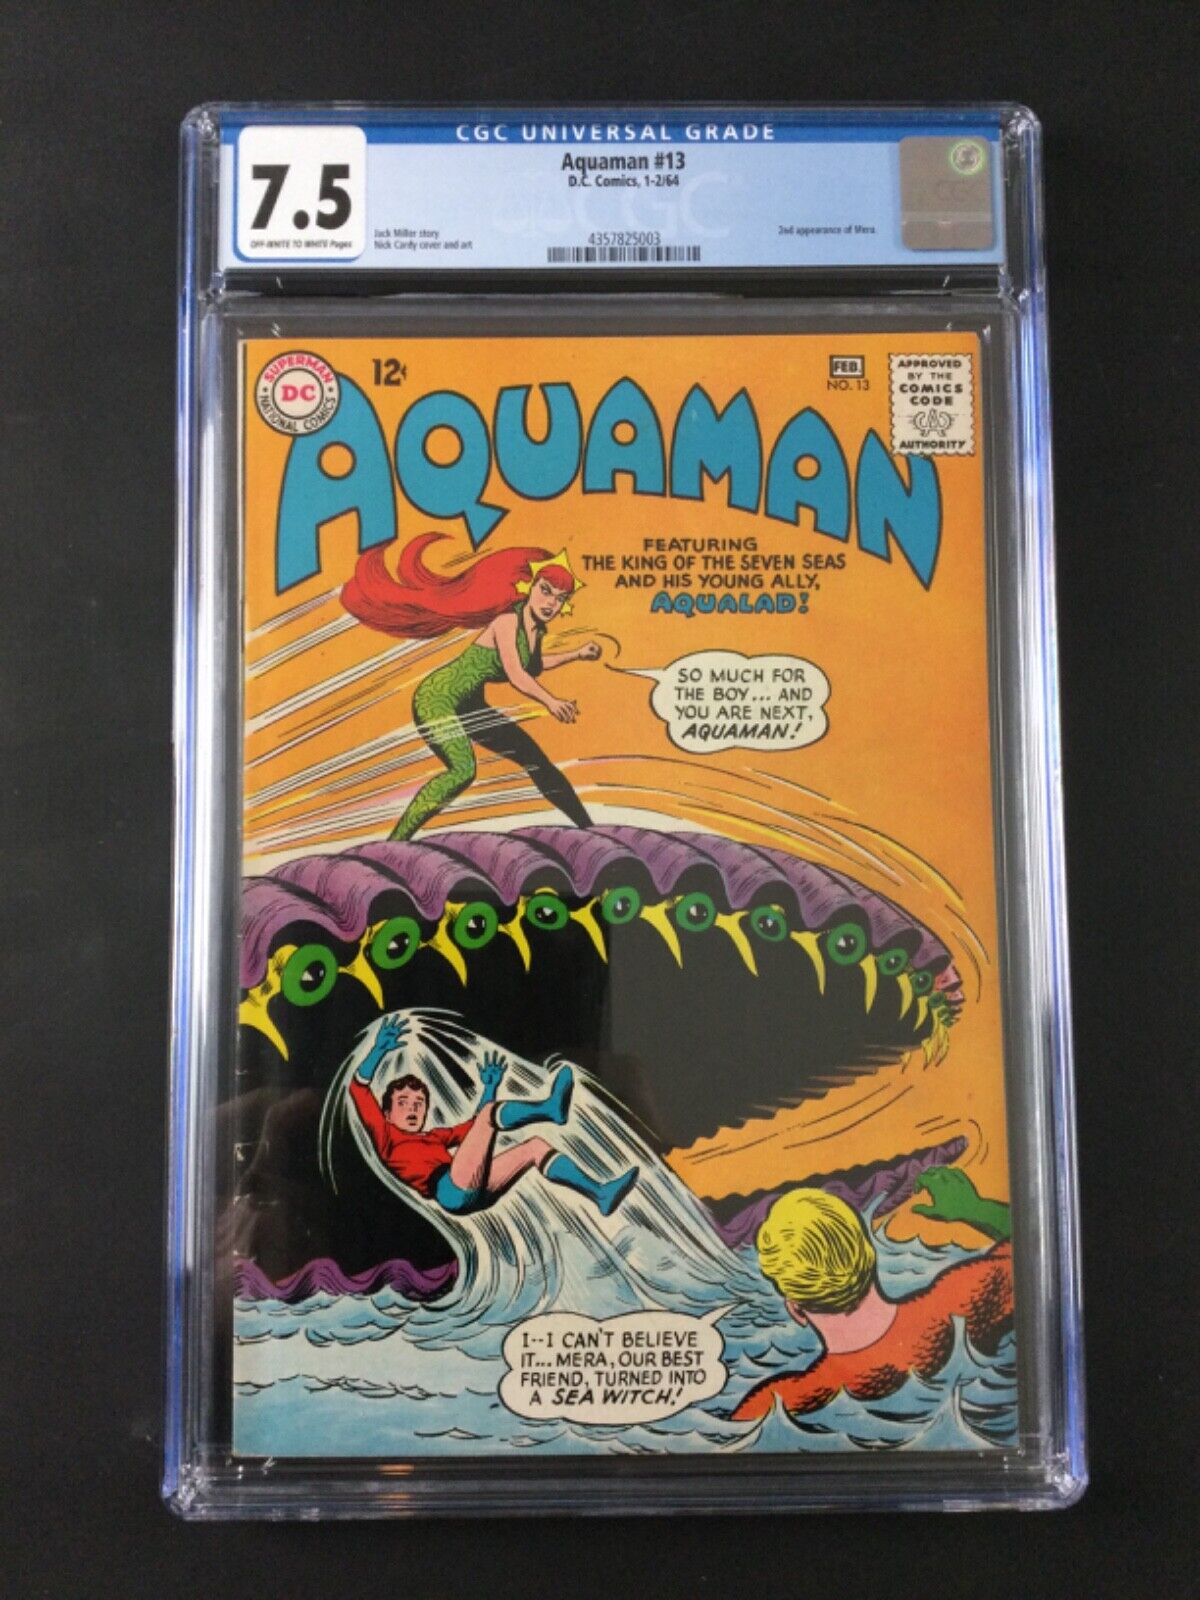 Aquaman #13 (1964): NEW CGC 7.5 2nd Appearance Mera Nick Cardy Cover Art